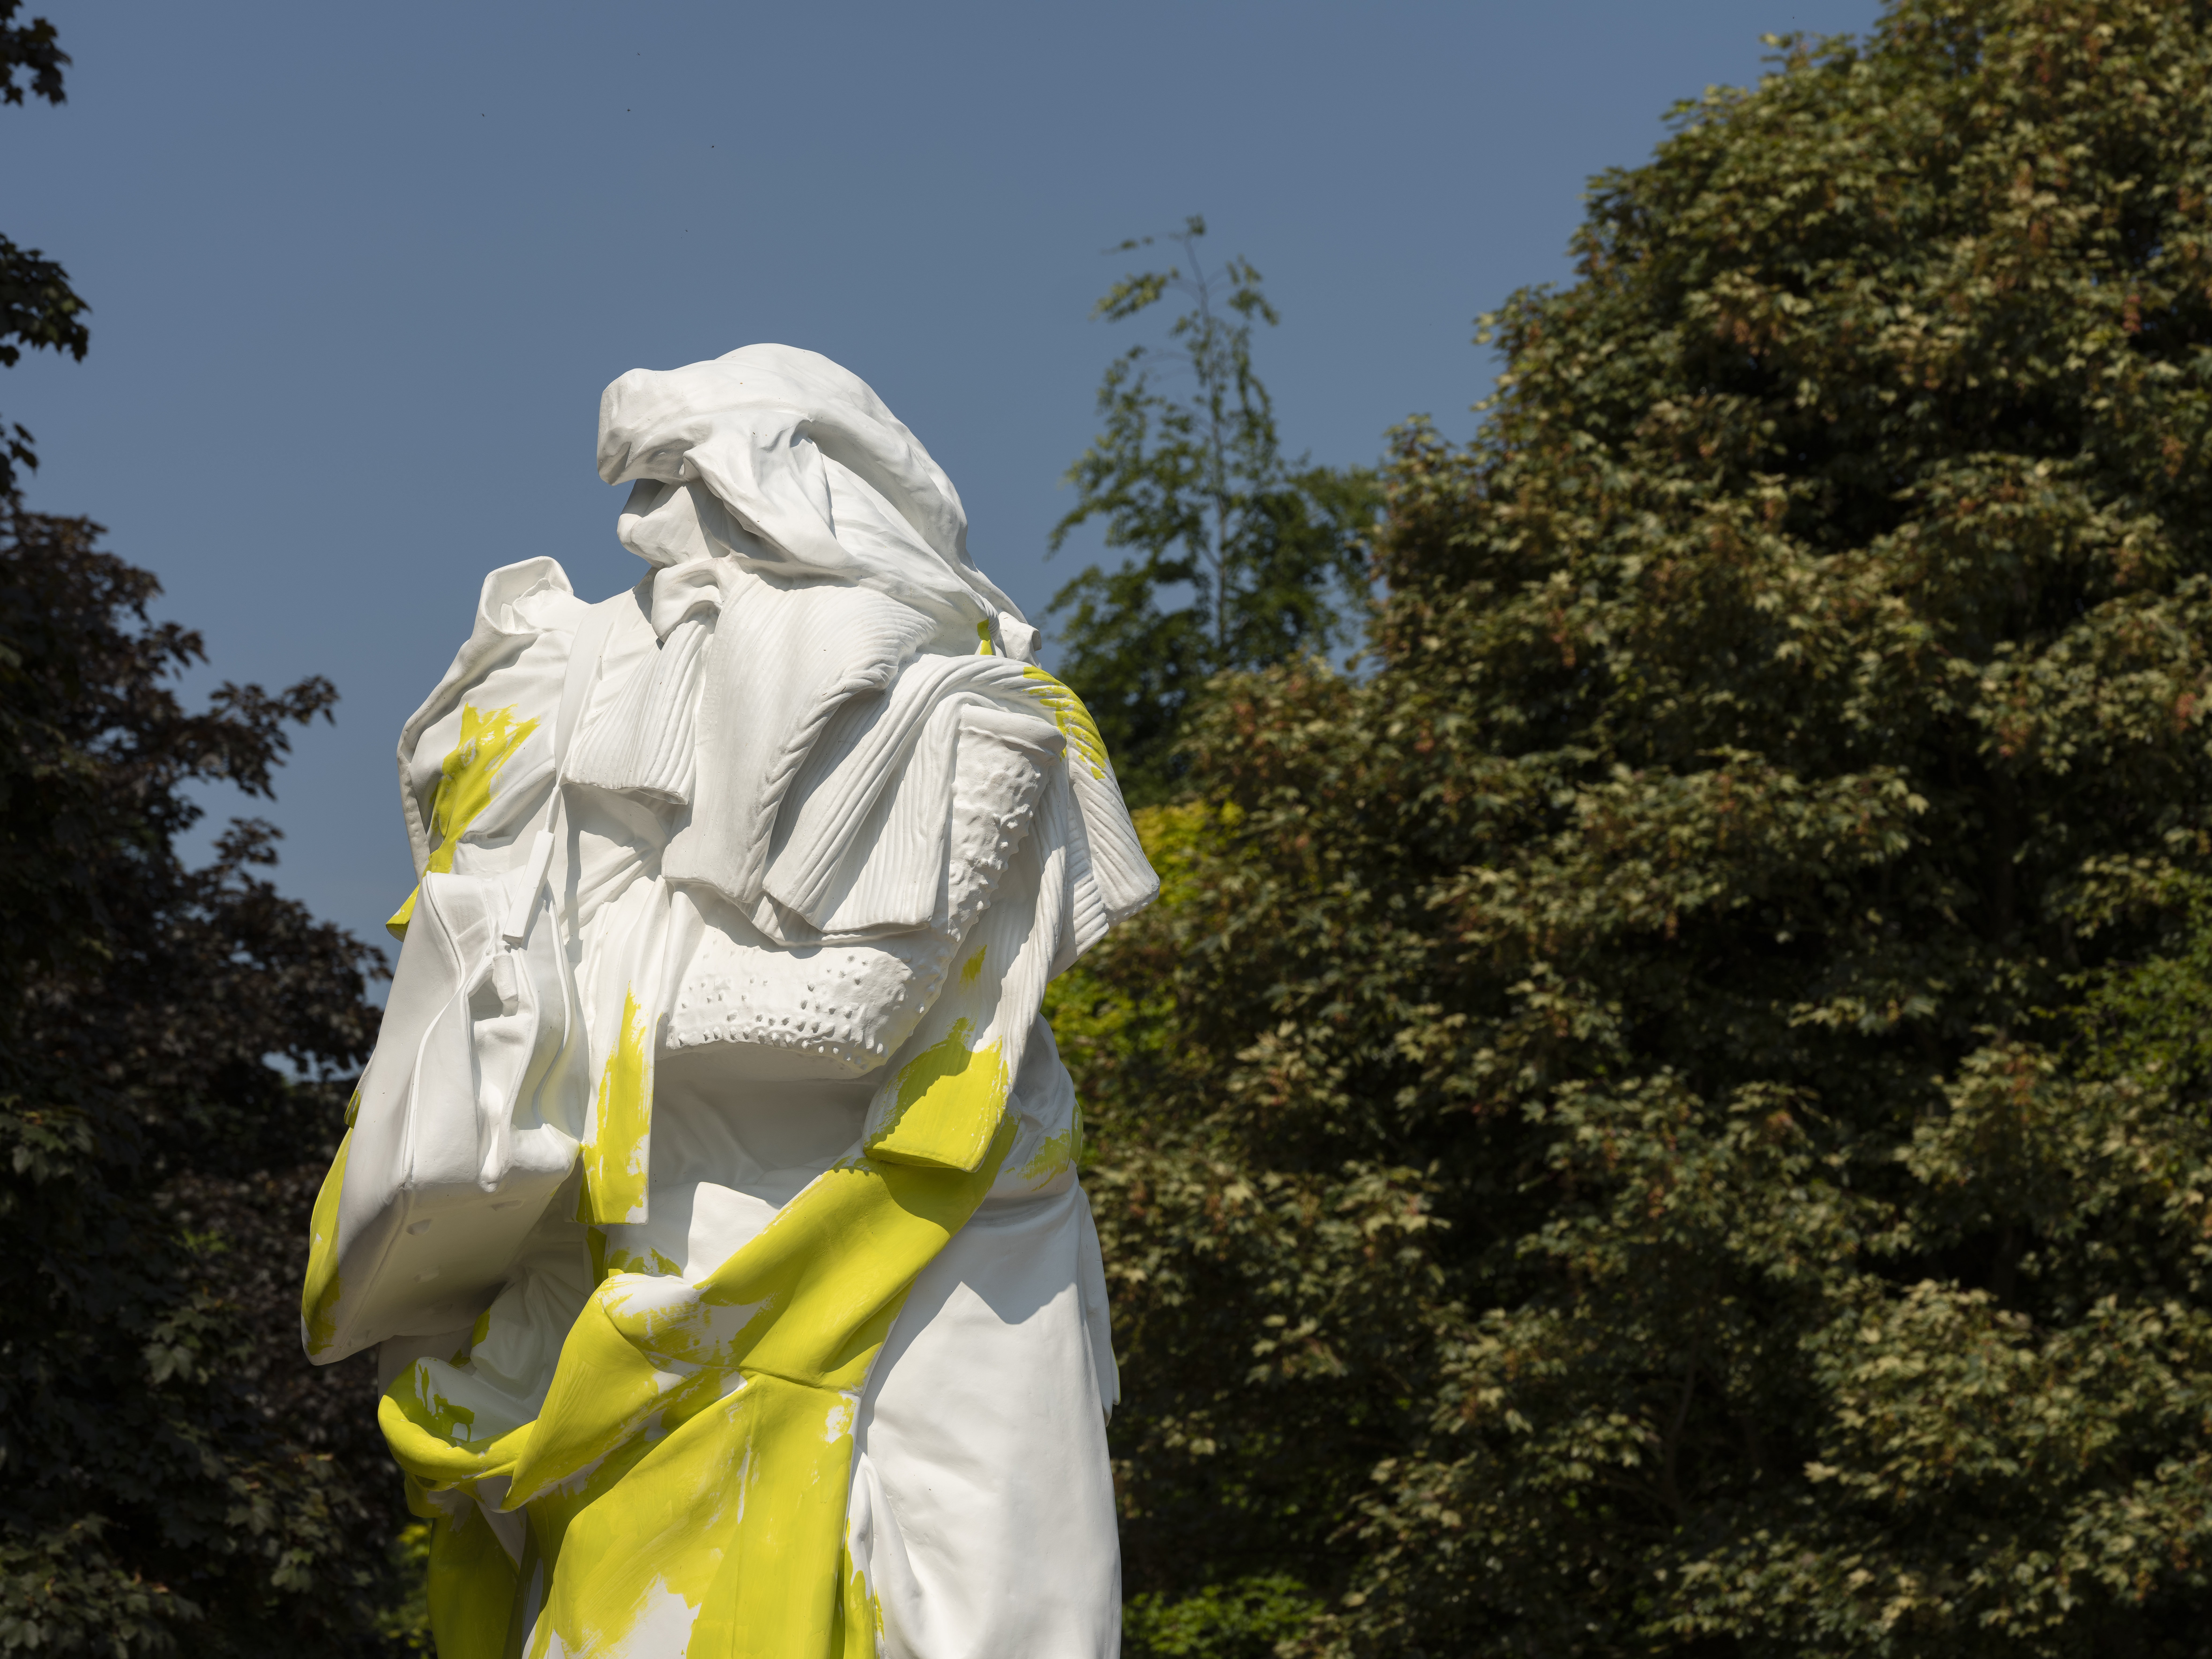 A yellow and white sculpture of a figure draped in clothing